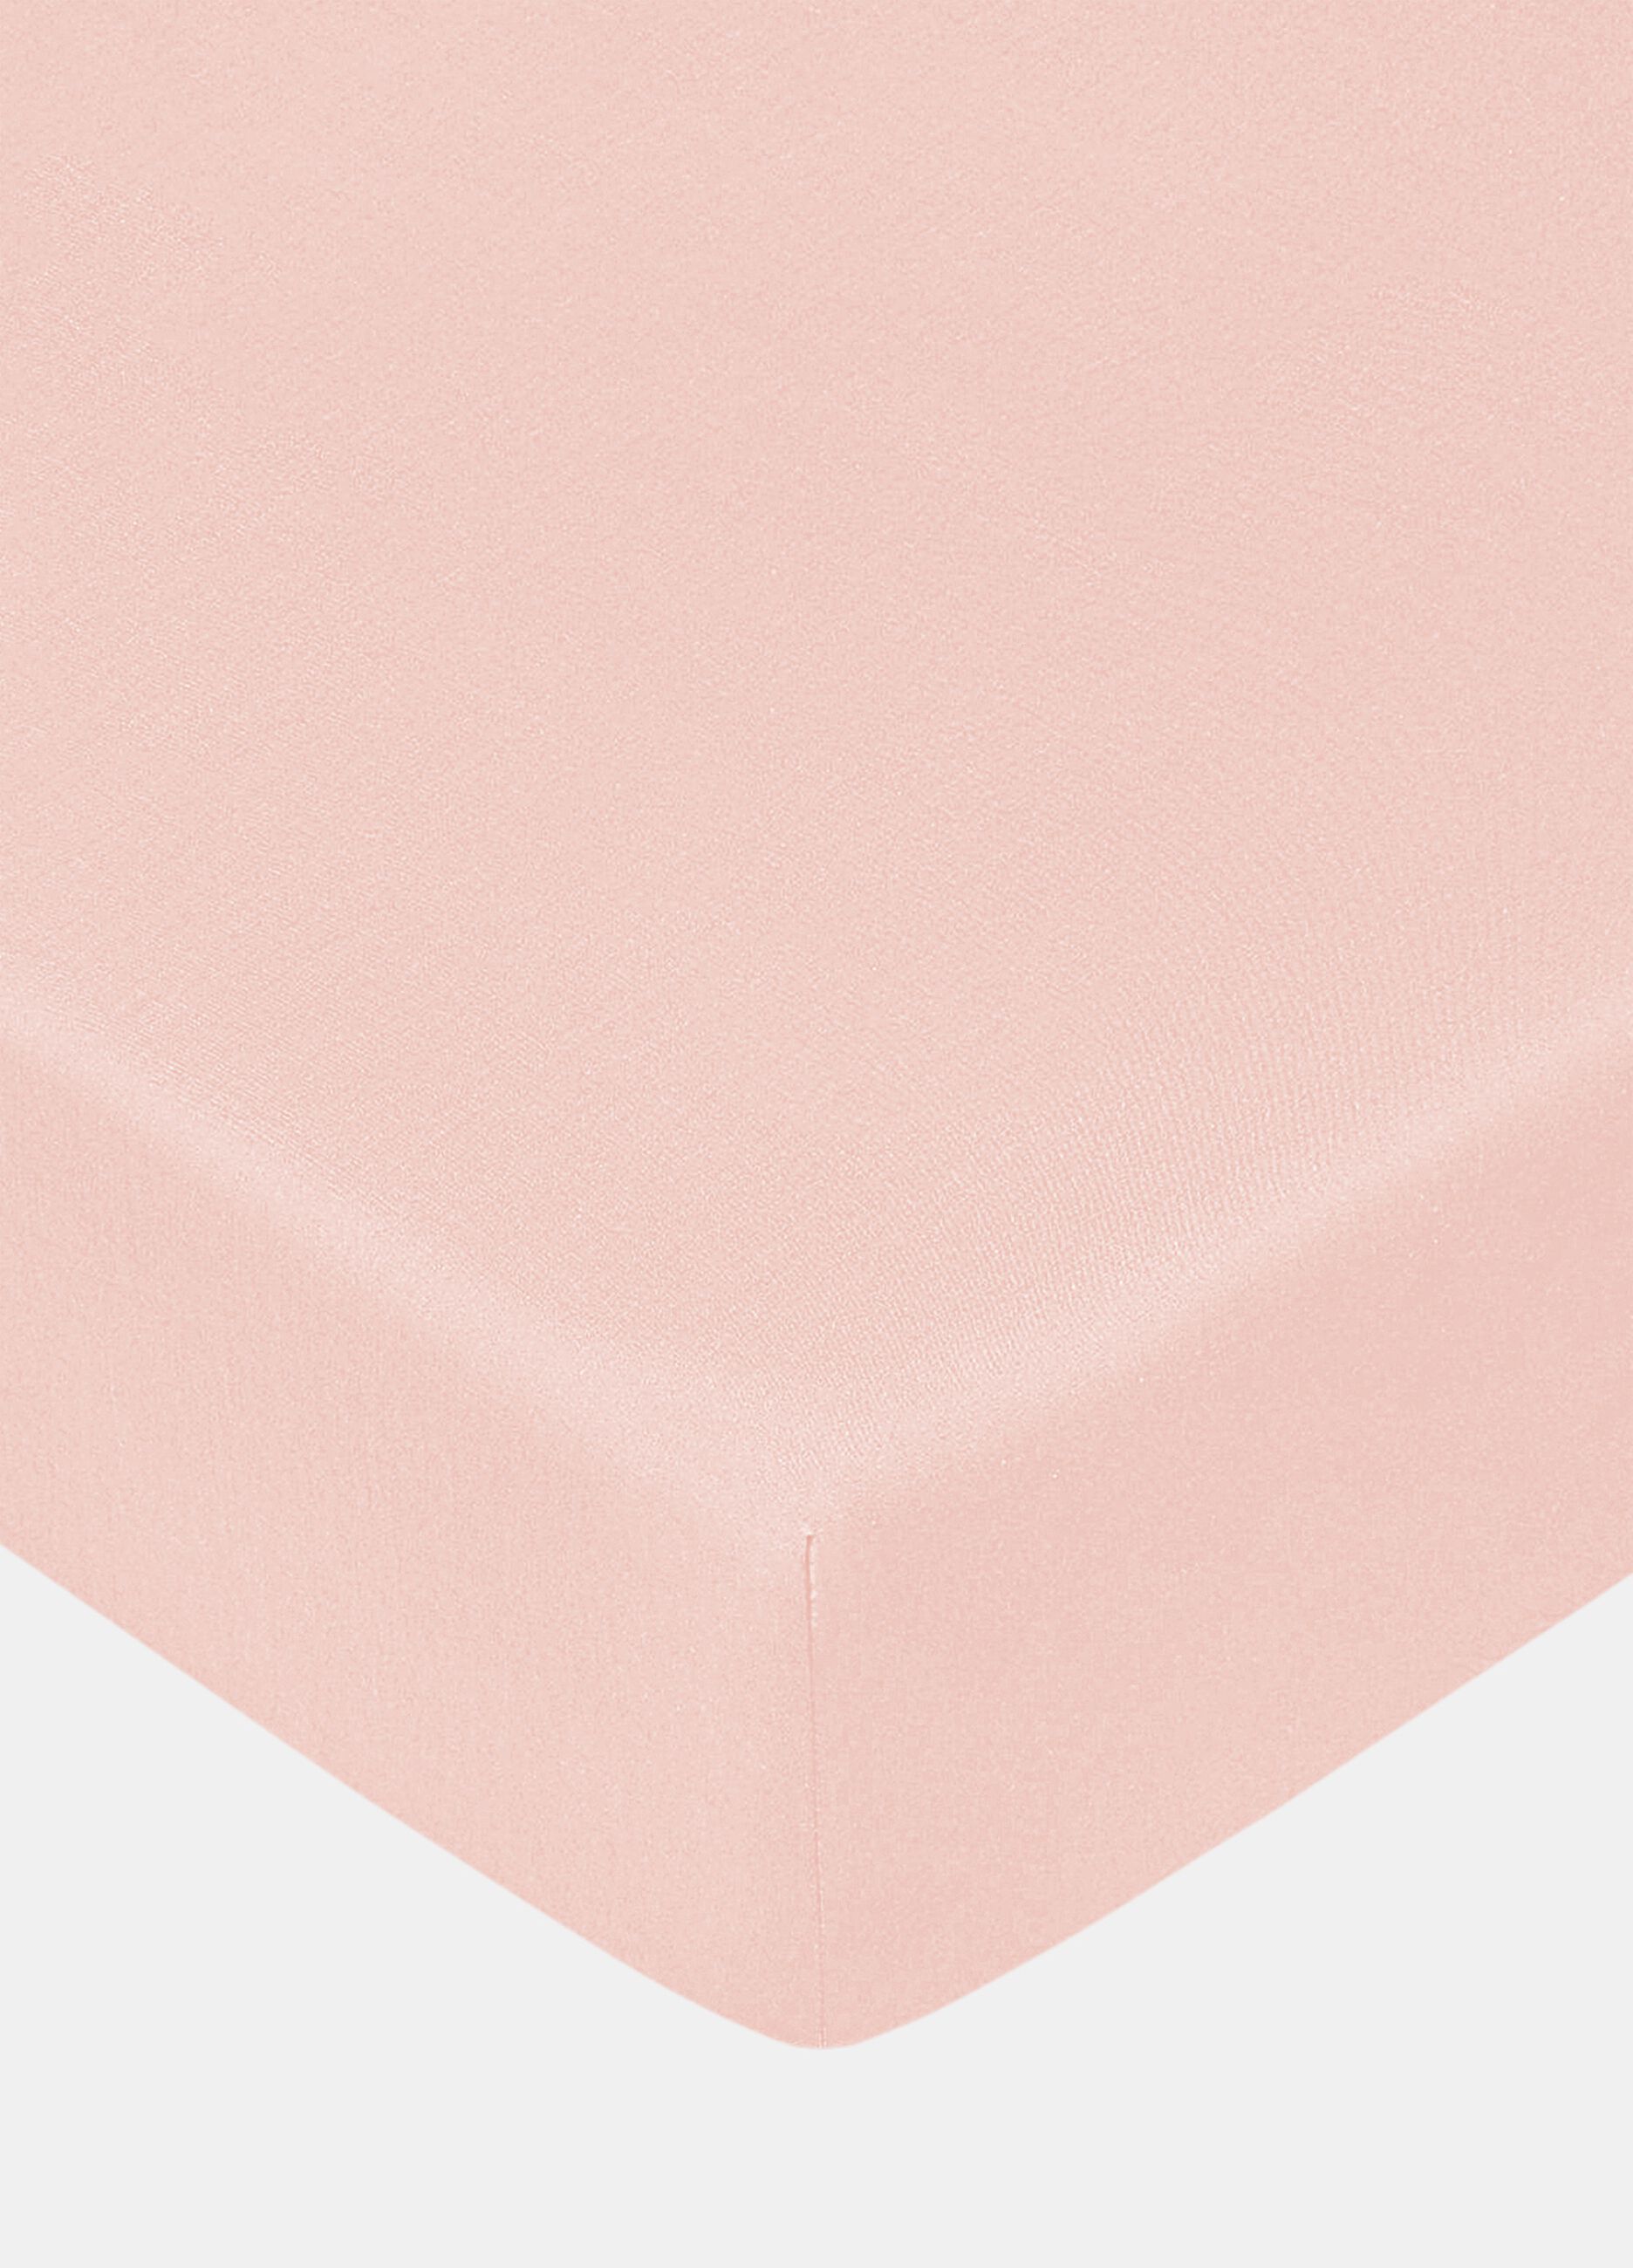 Fitted double sheet in 100% cotton